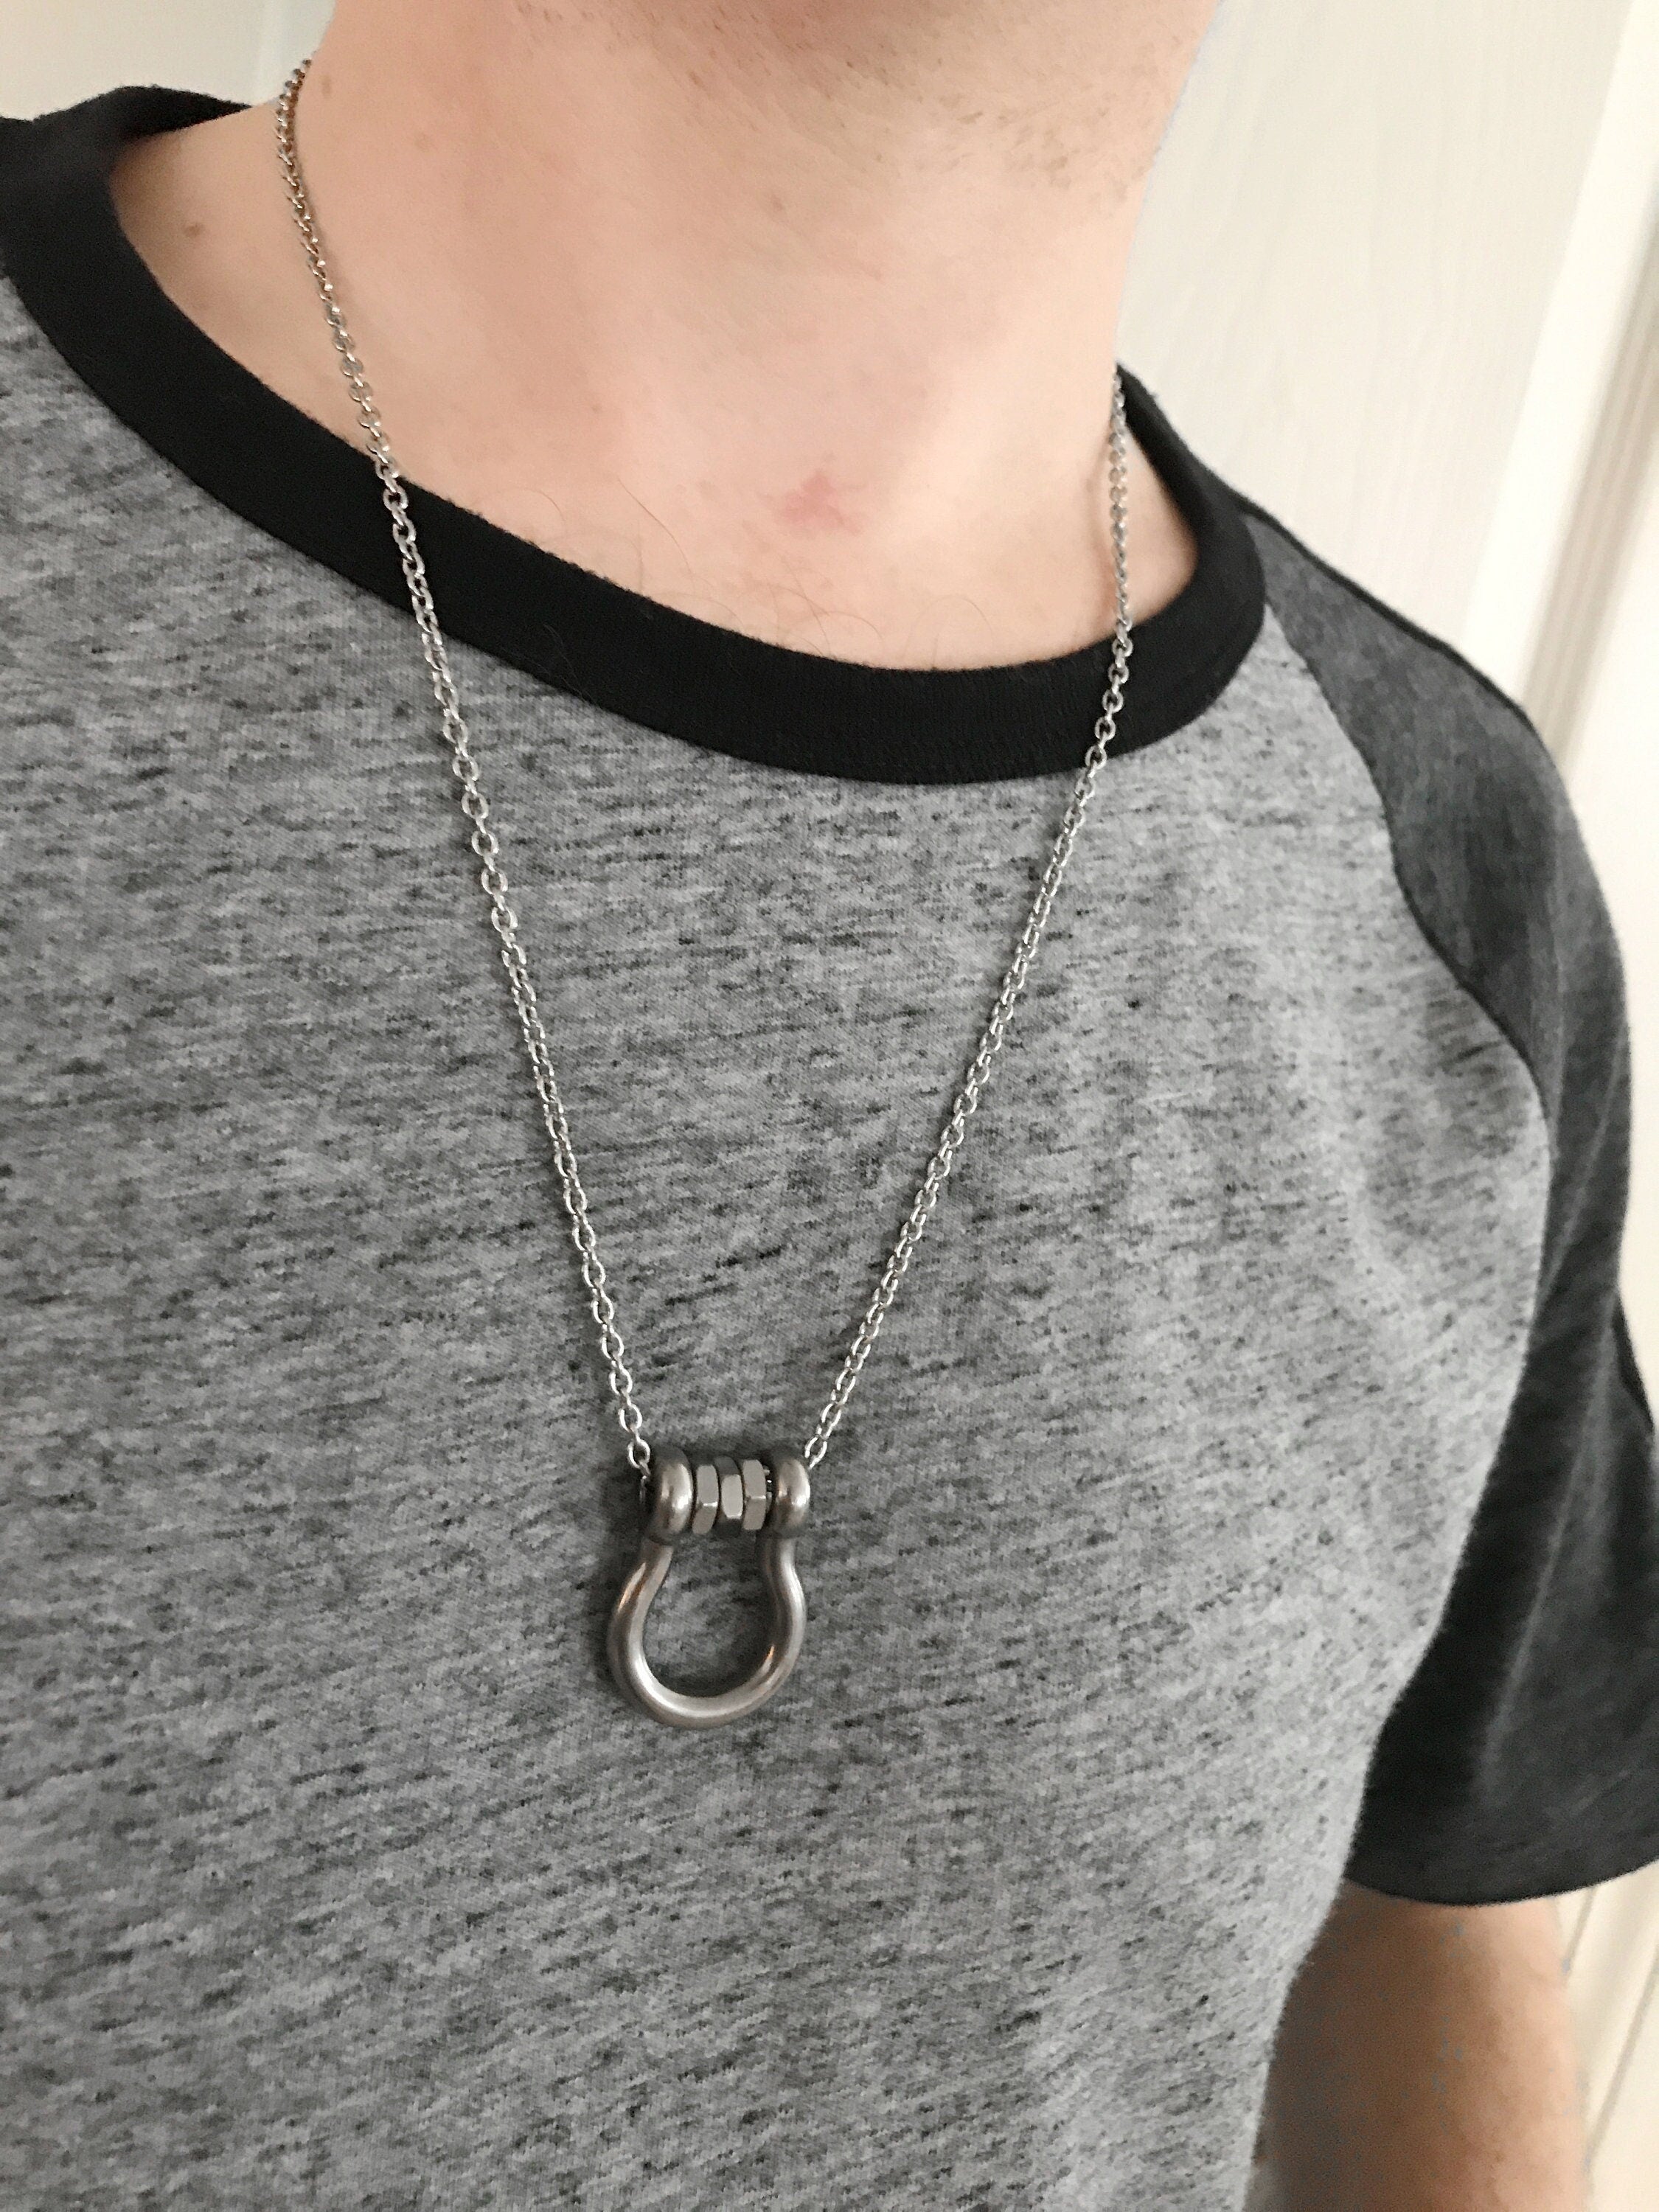 Lucky Sterling Silver Or Gold Horseshoe Necklace By Hersey Silversmiths |  notonthehighstreet.com